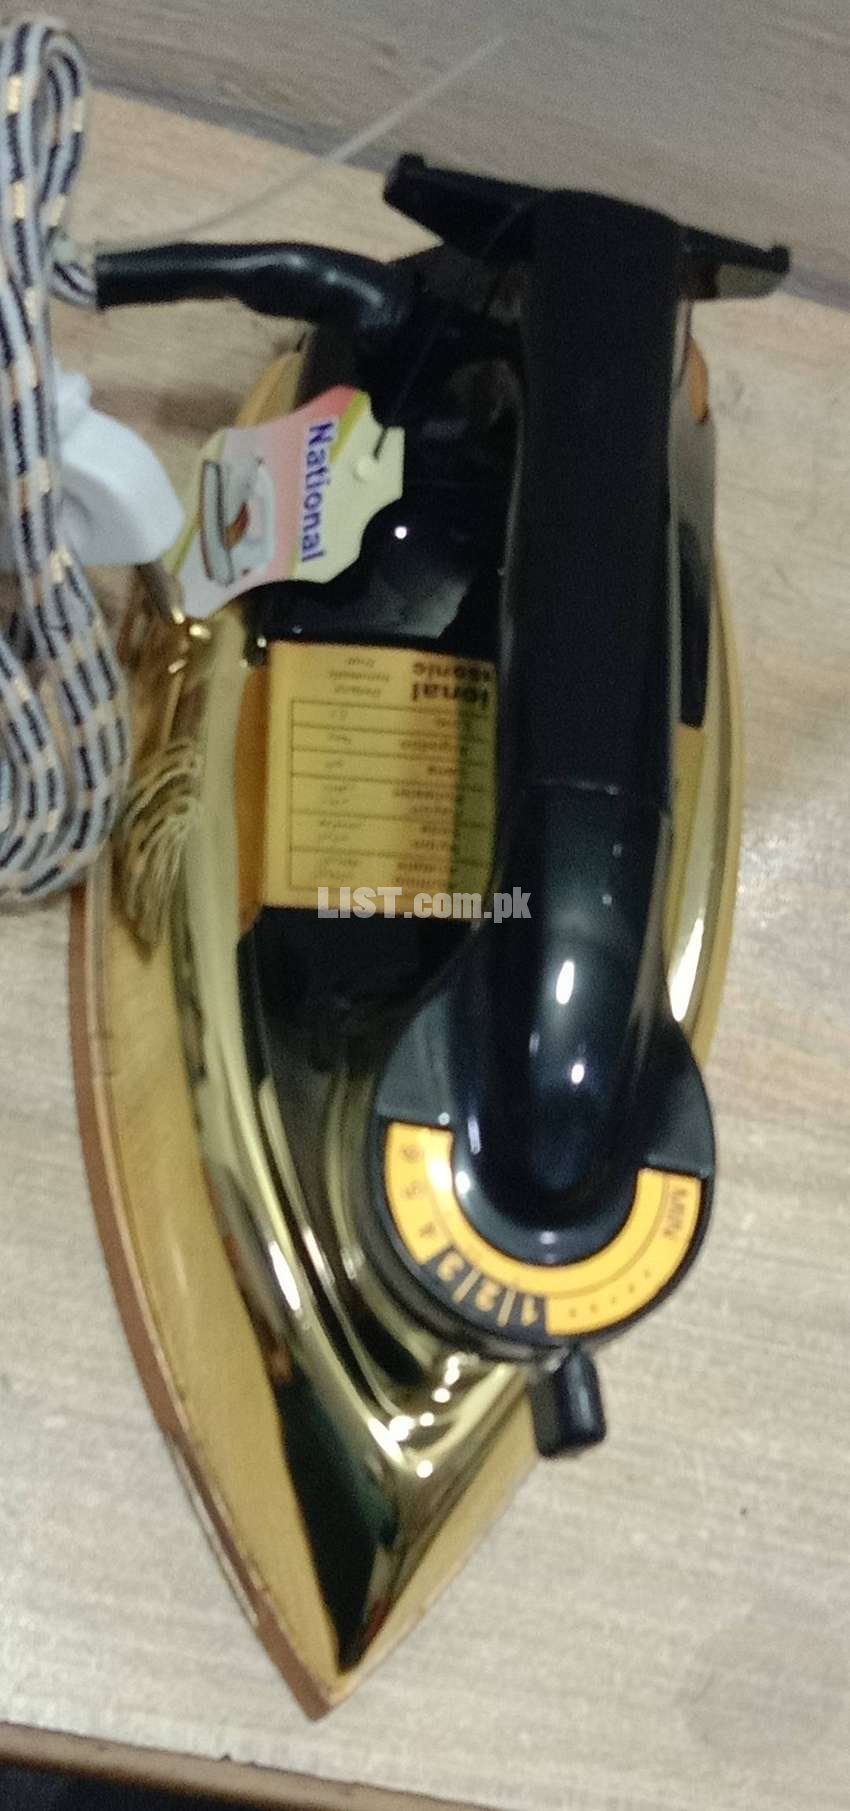 Higher quality national golden iron with black handle